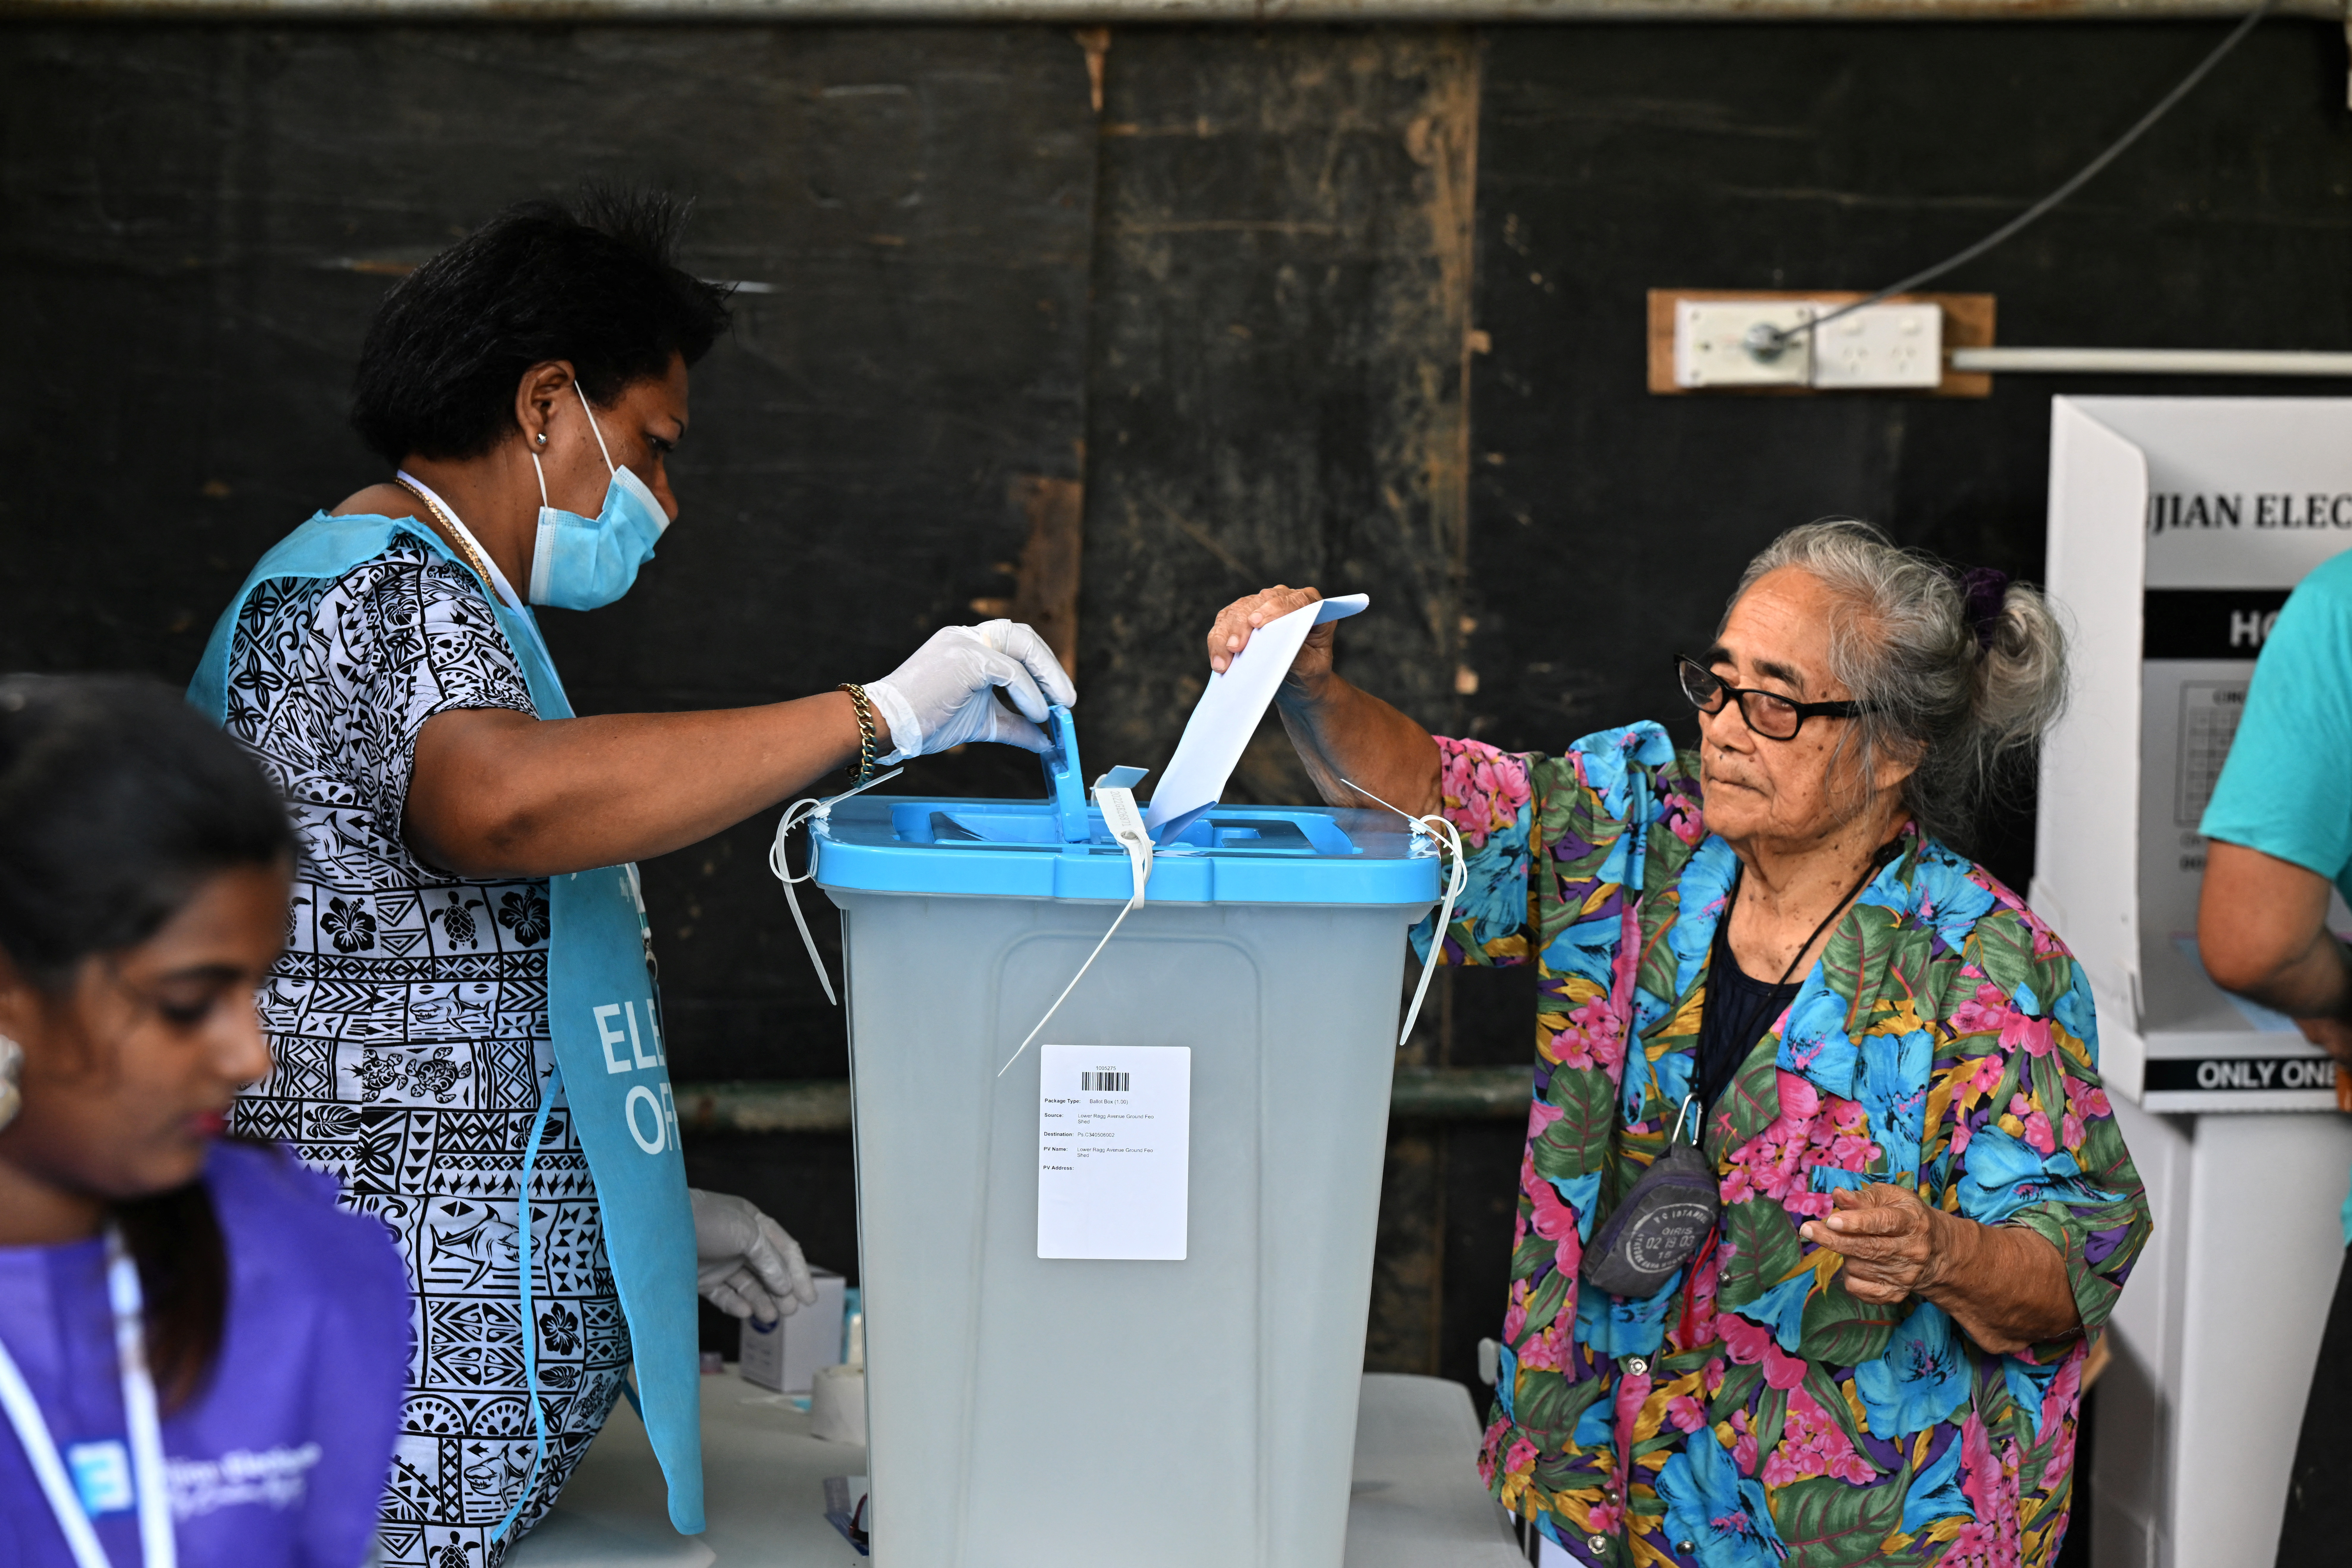 Fijians head to the polls for general election